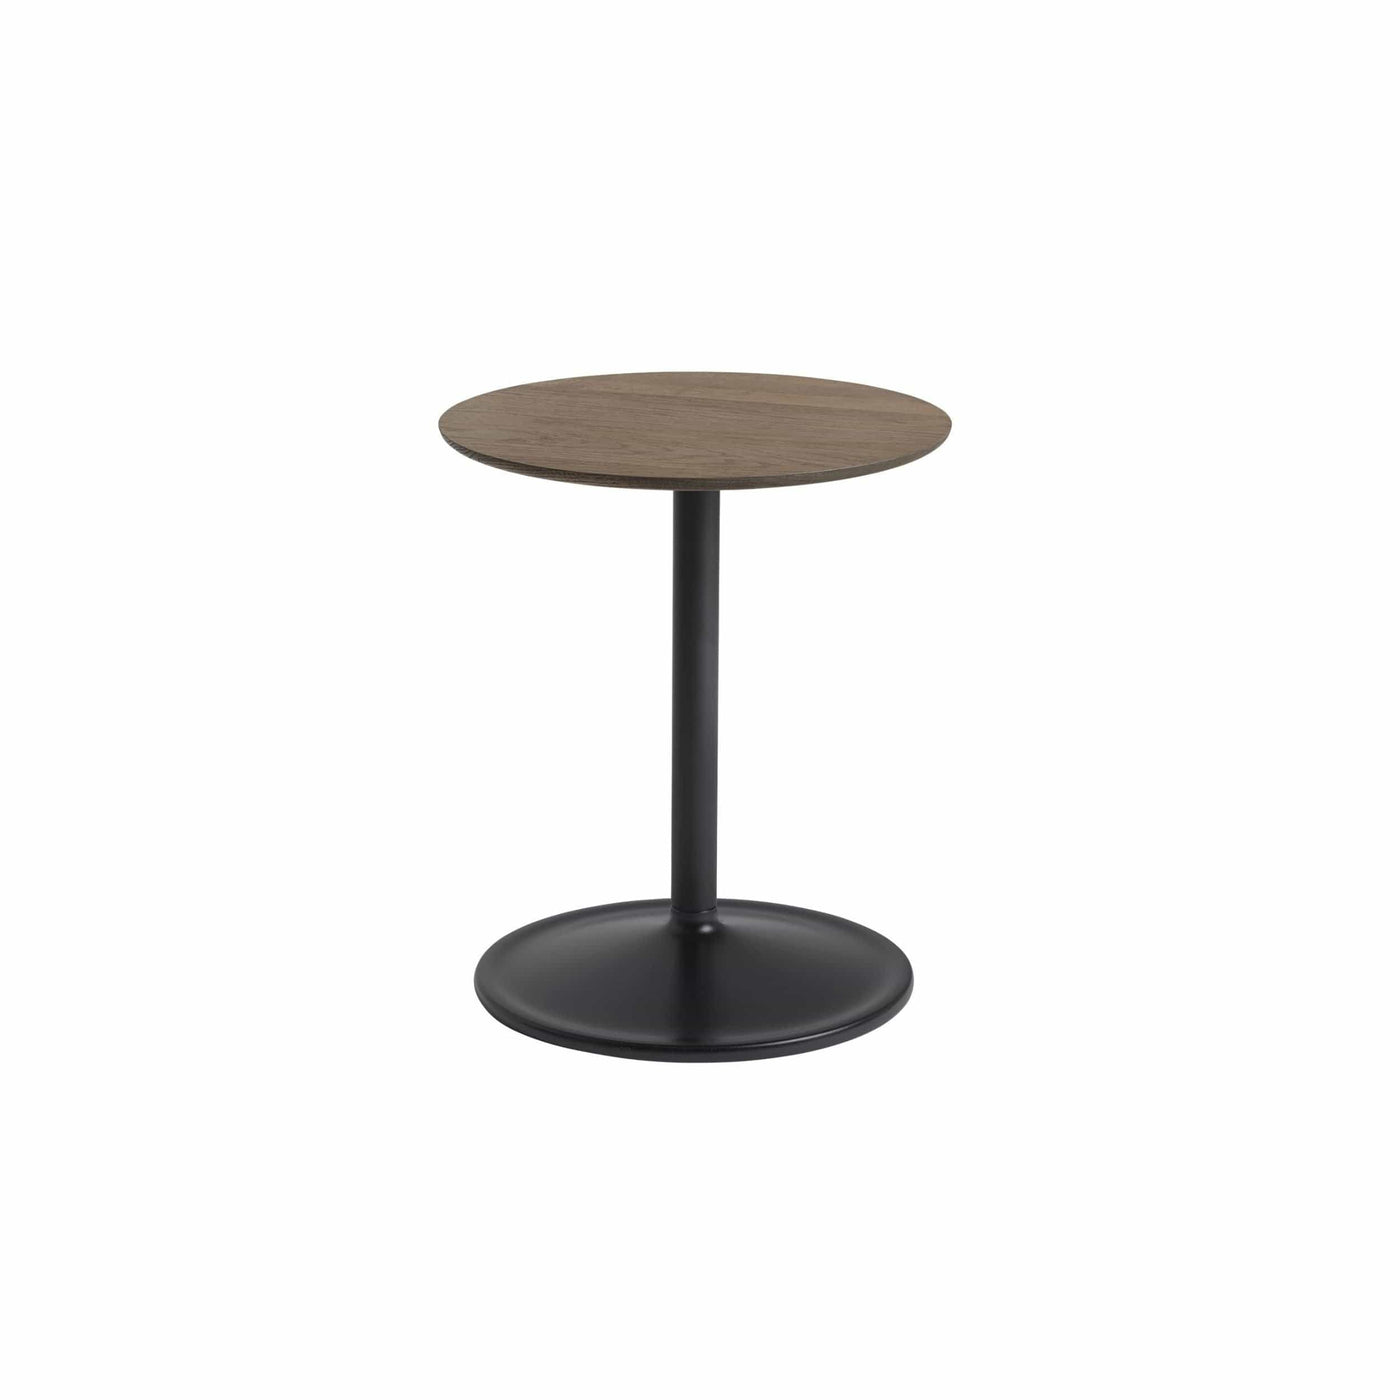 Muuto Soft side table Ø41 x 48cm high. Shop online at someday designs. #colour_solid-smoked-oak-black